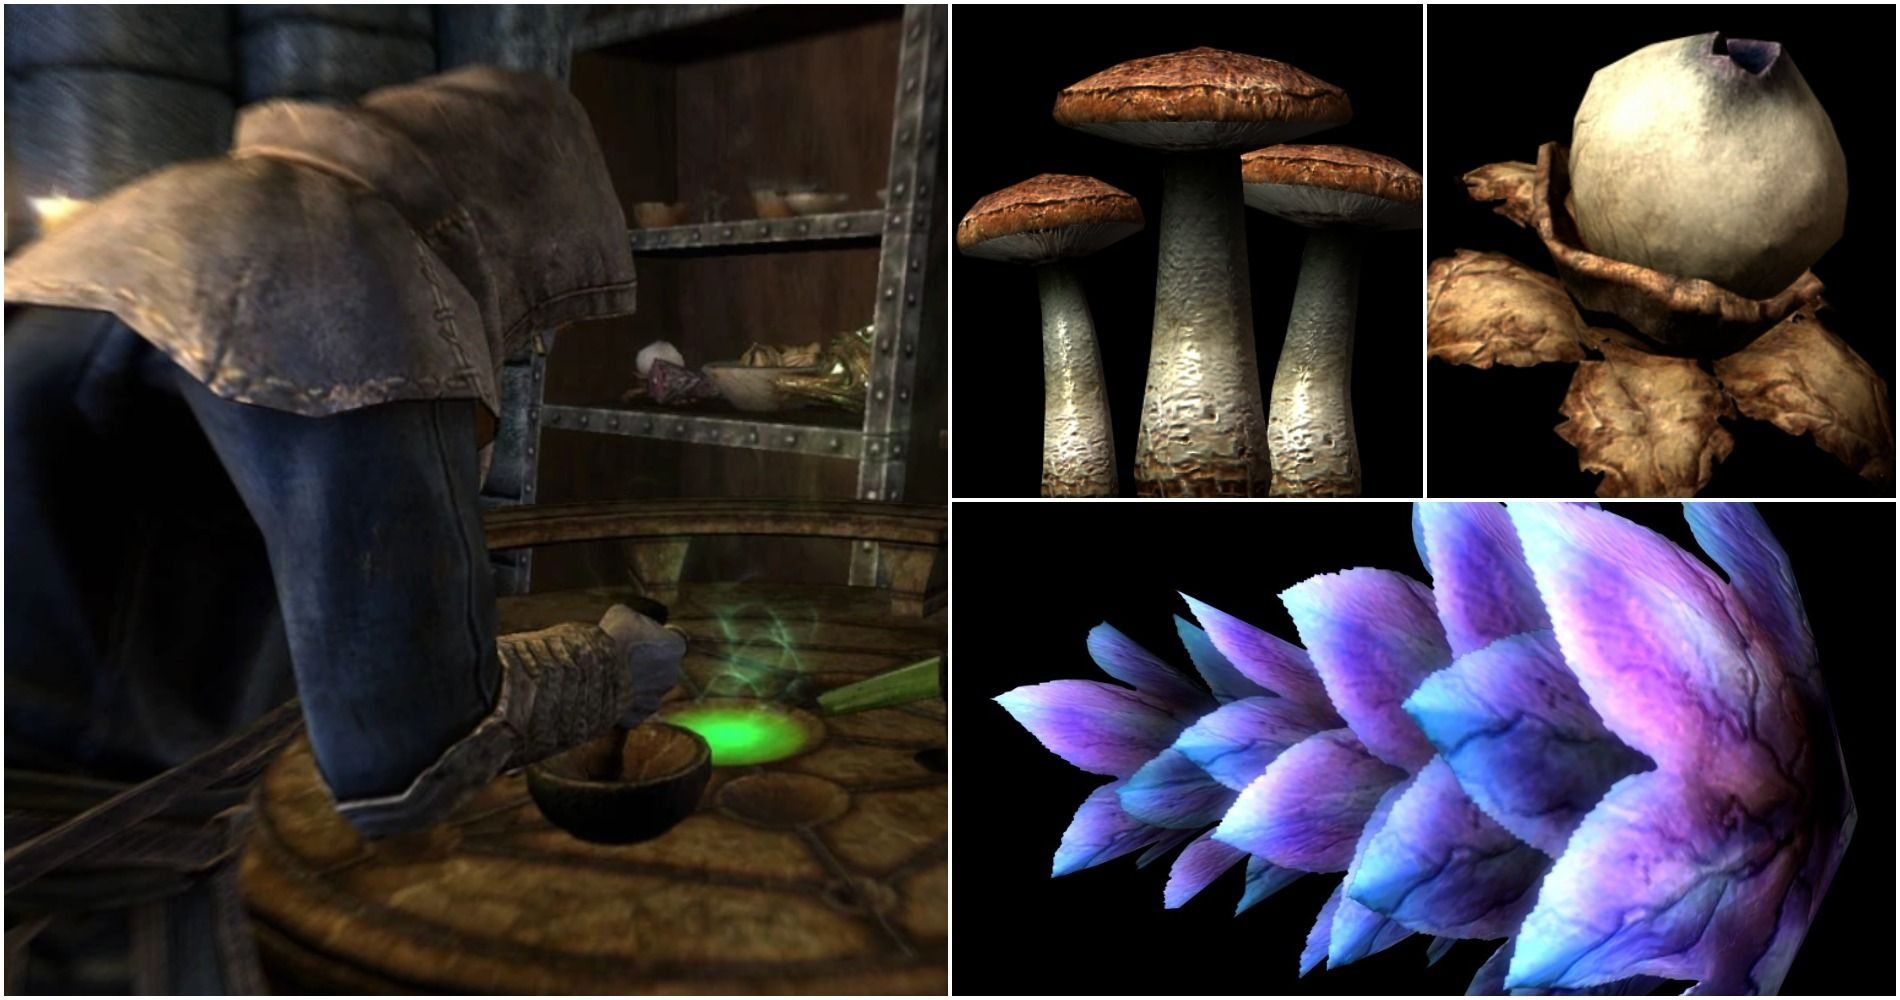 Left: player performing alchemy; right: several alchemical ingredients